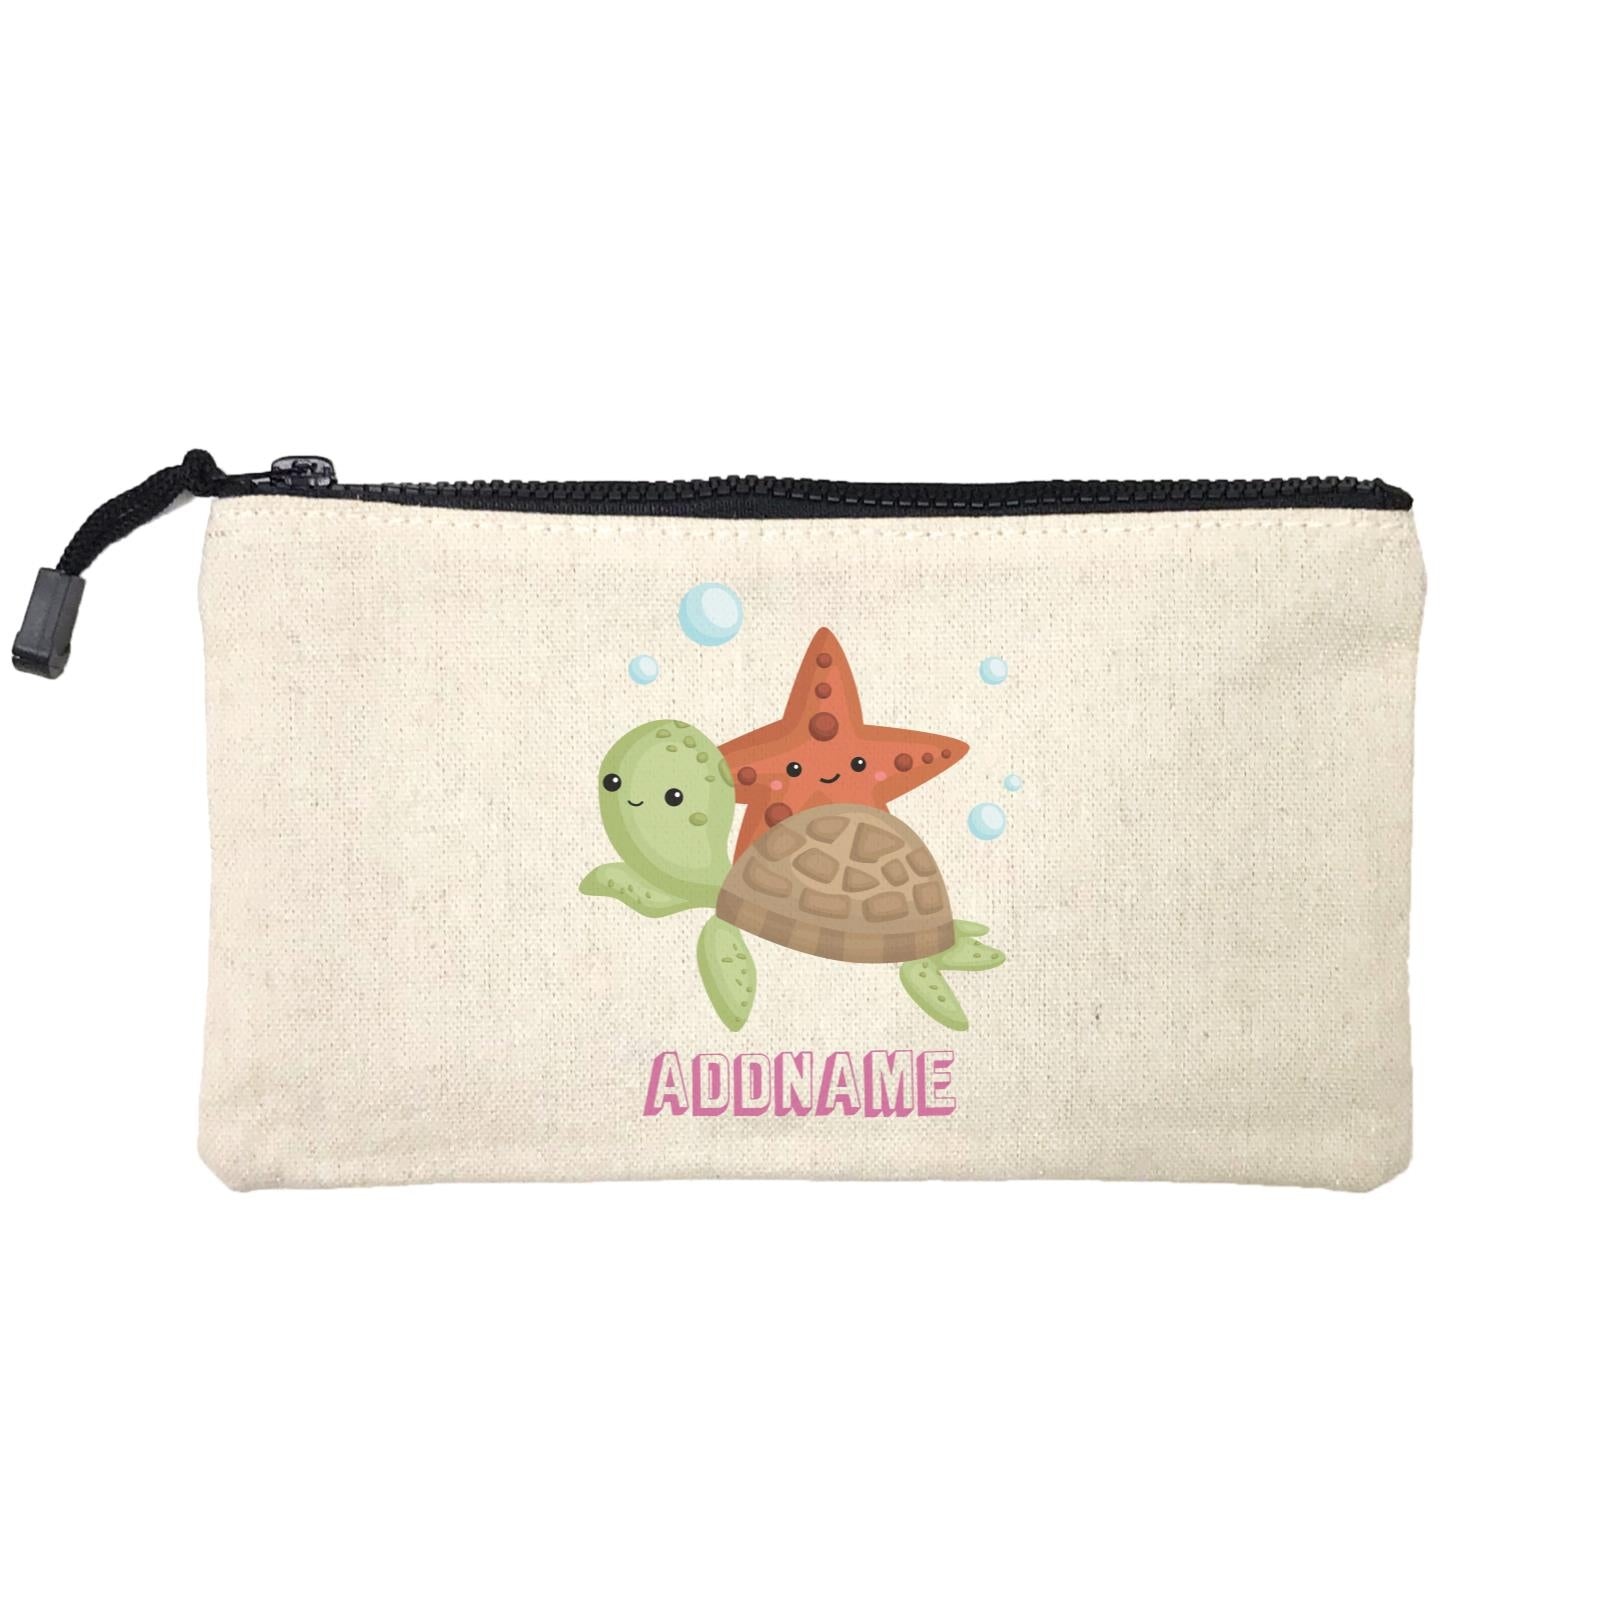 Birthday Mermaid Turtle And Starfish Addname Mini Accessories Stationery Pouch